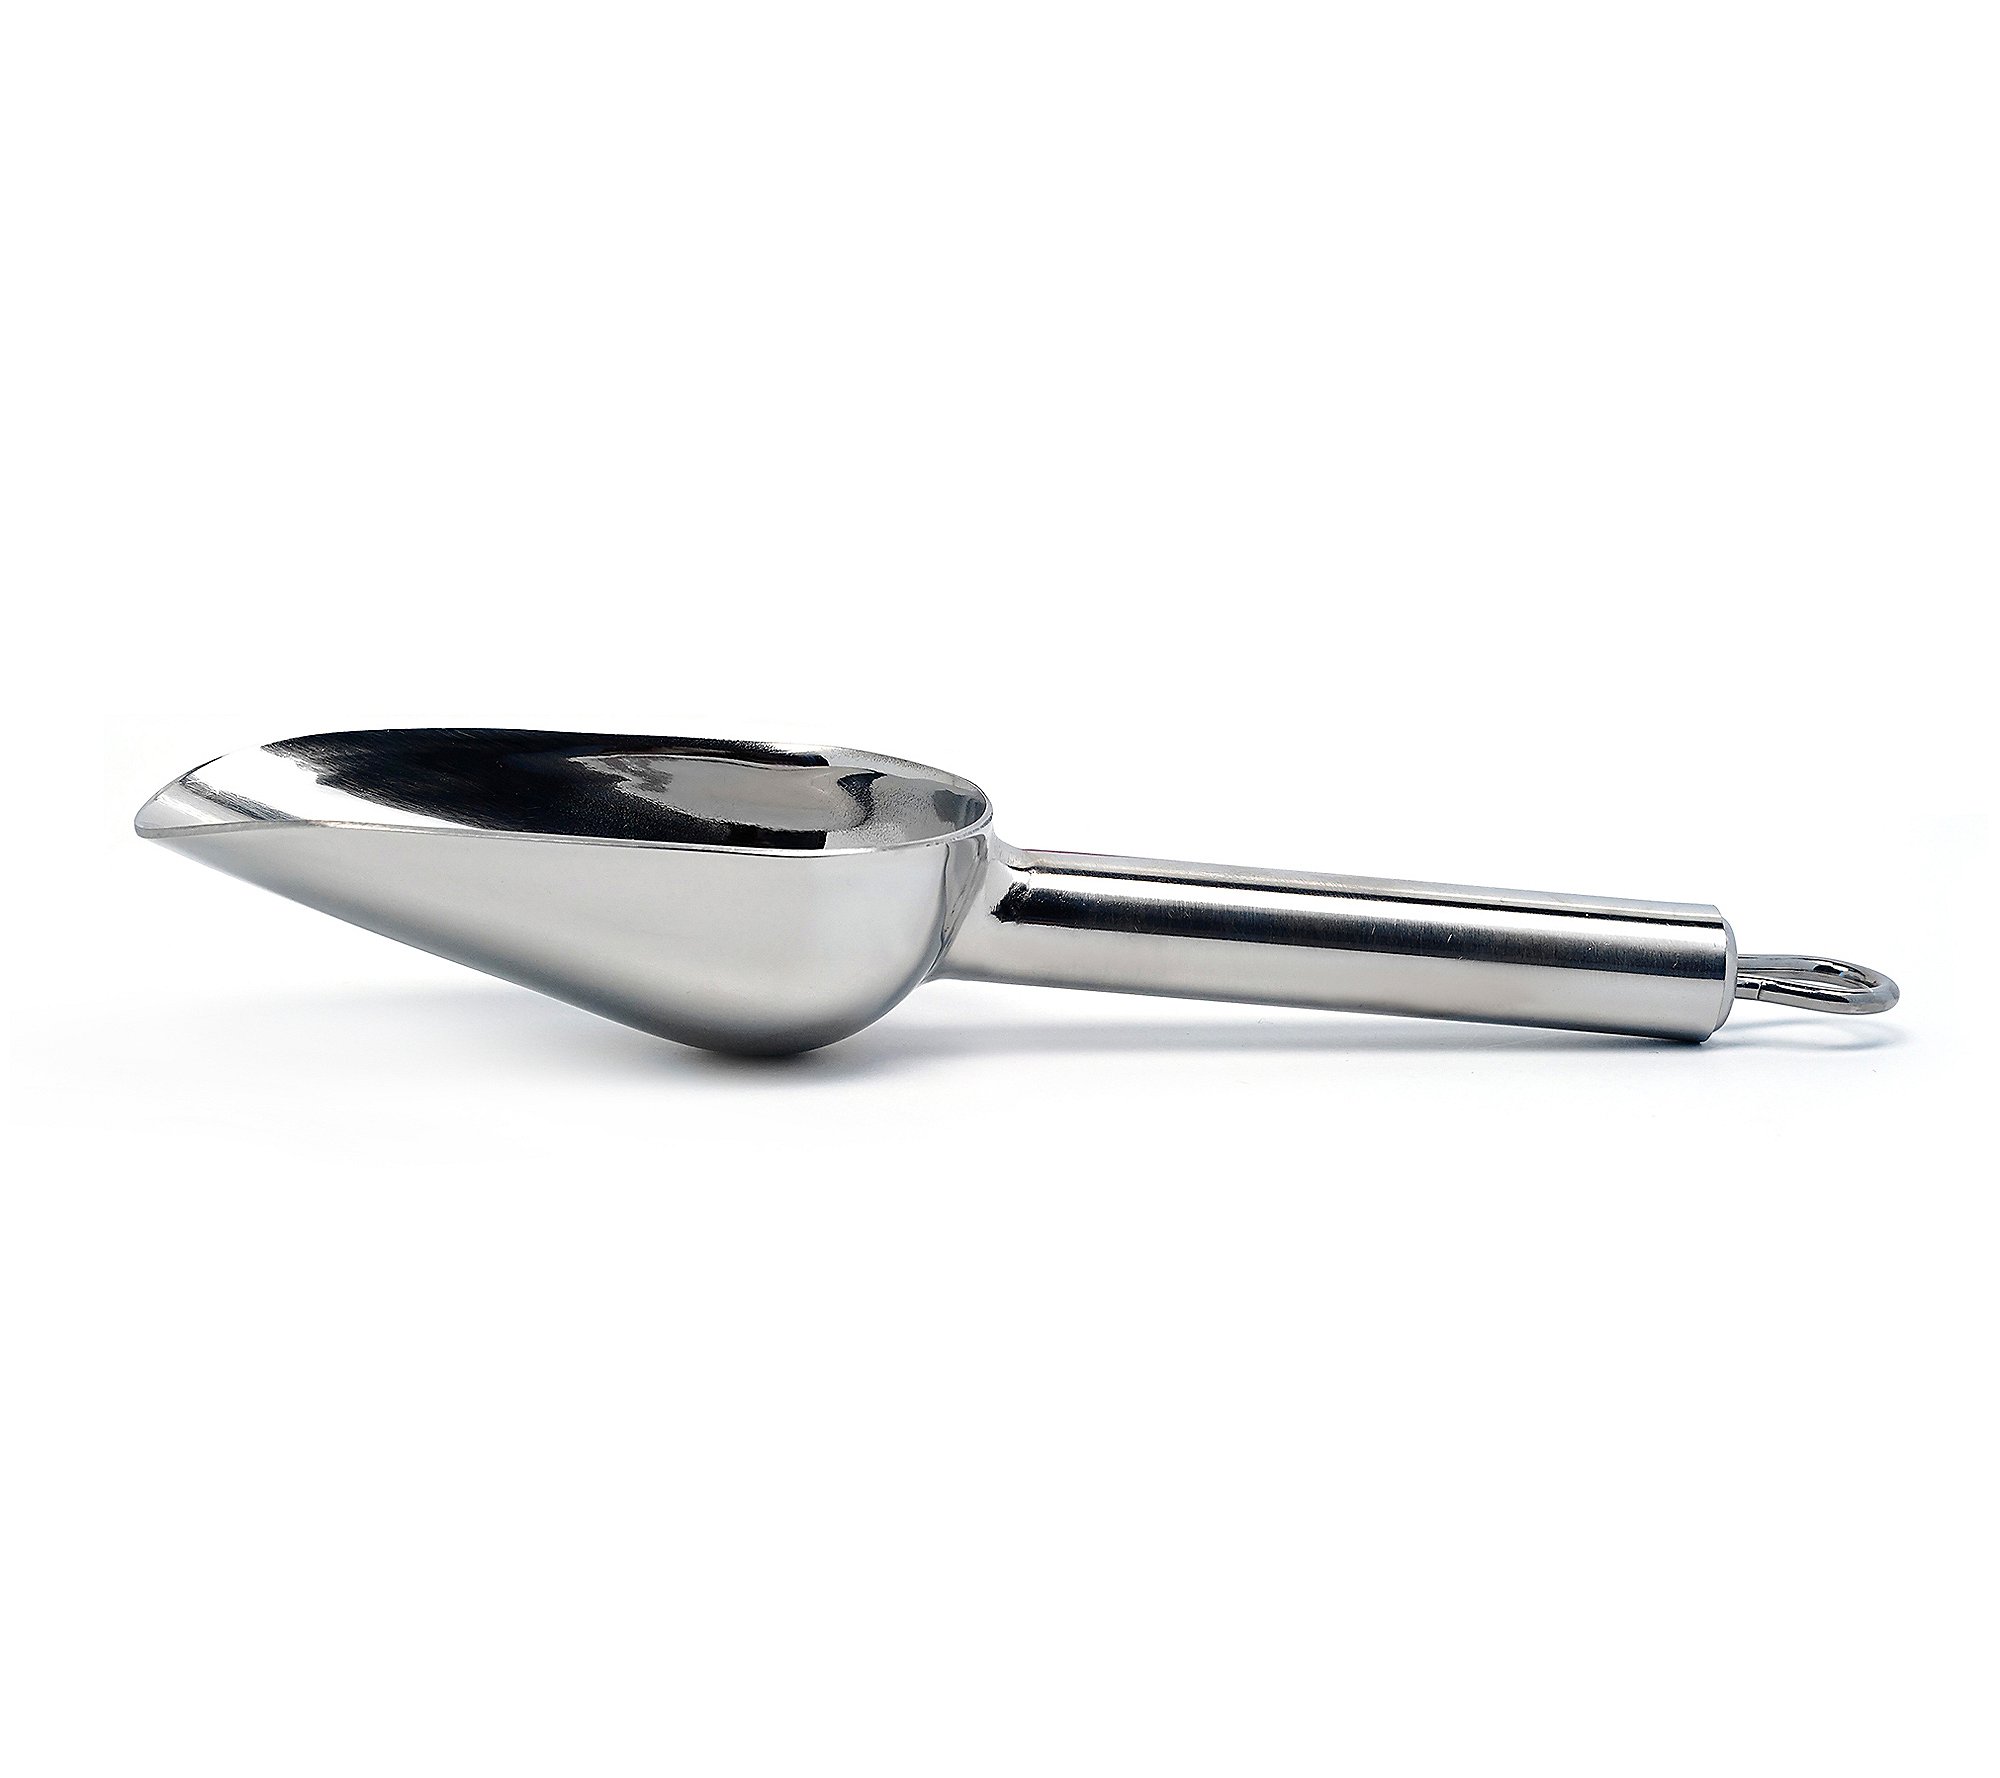 RSVP 1 4-Cup Stainless Steel Scoop